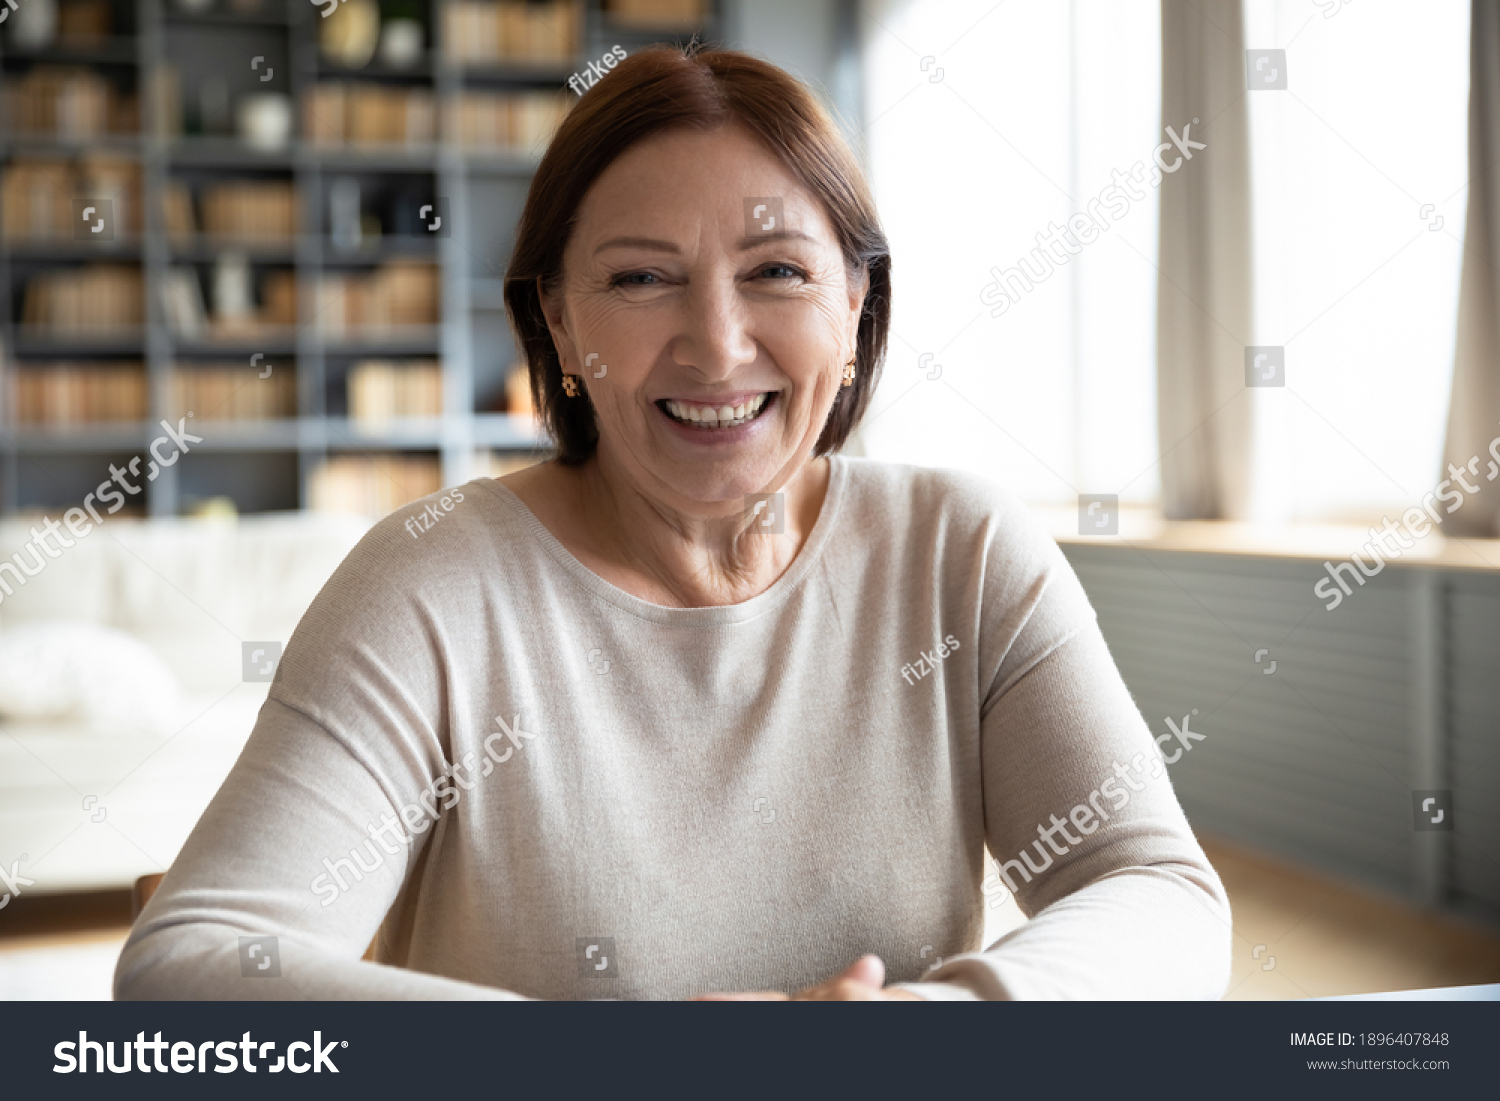 Head shot portrait smiling mature woman making video call, grandmother chatting with relatives, using webcam, happy middle aged blogger recording vlog, teacher holding online lesson, distance lecture #1896407848